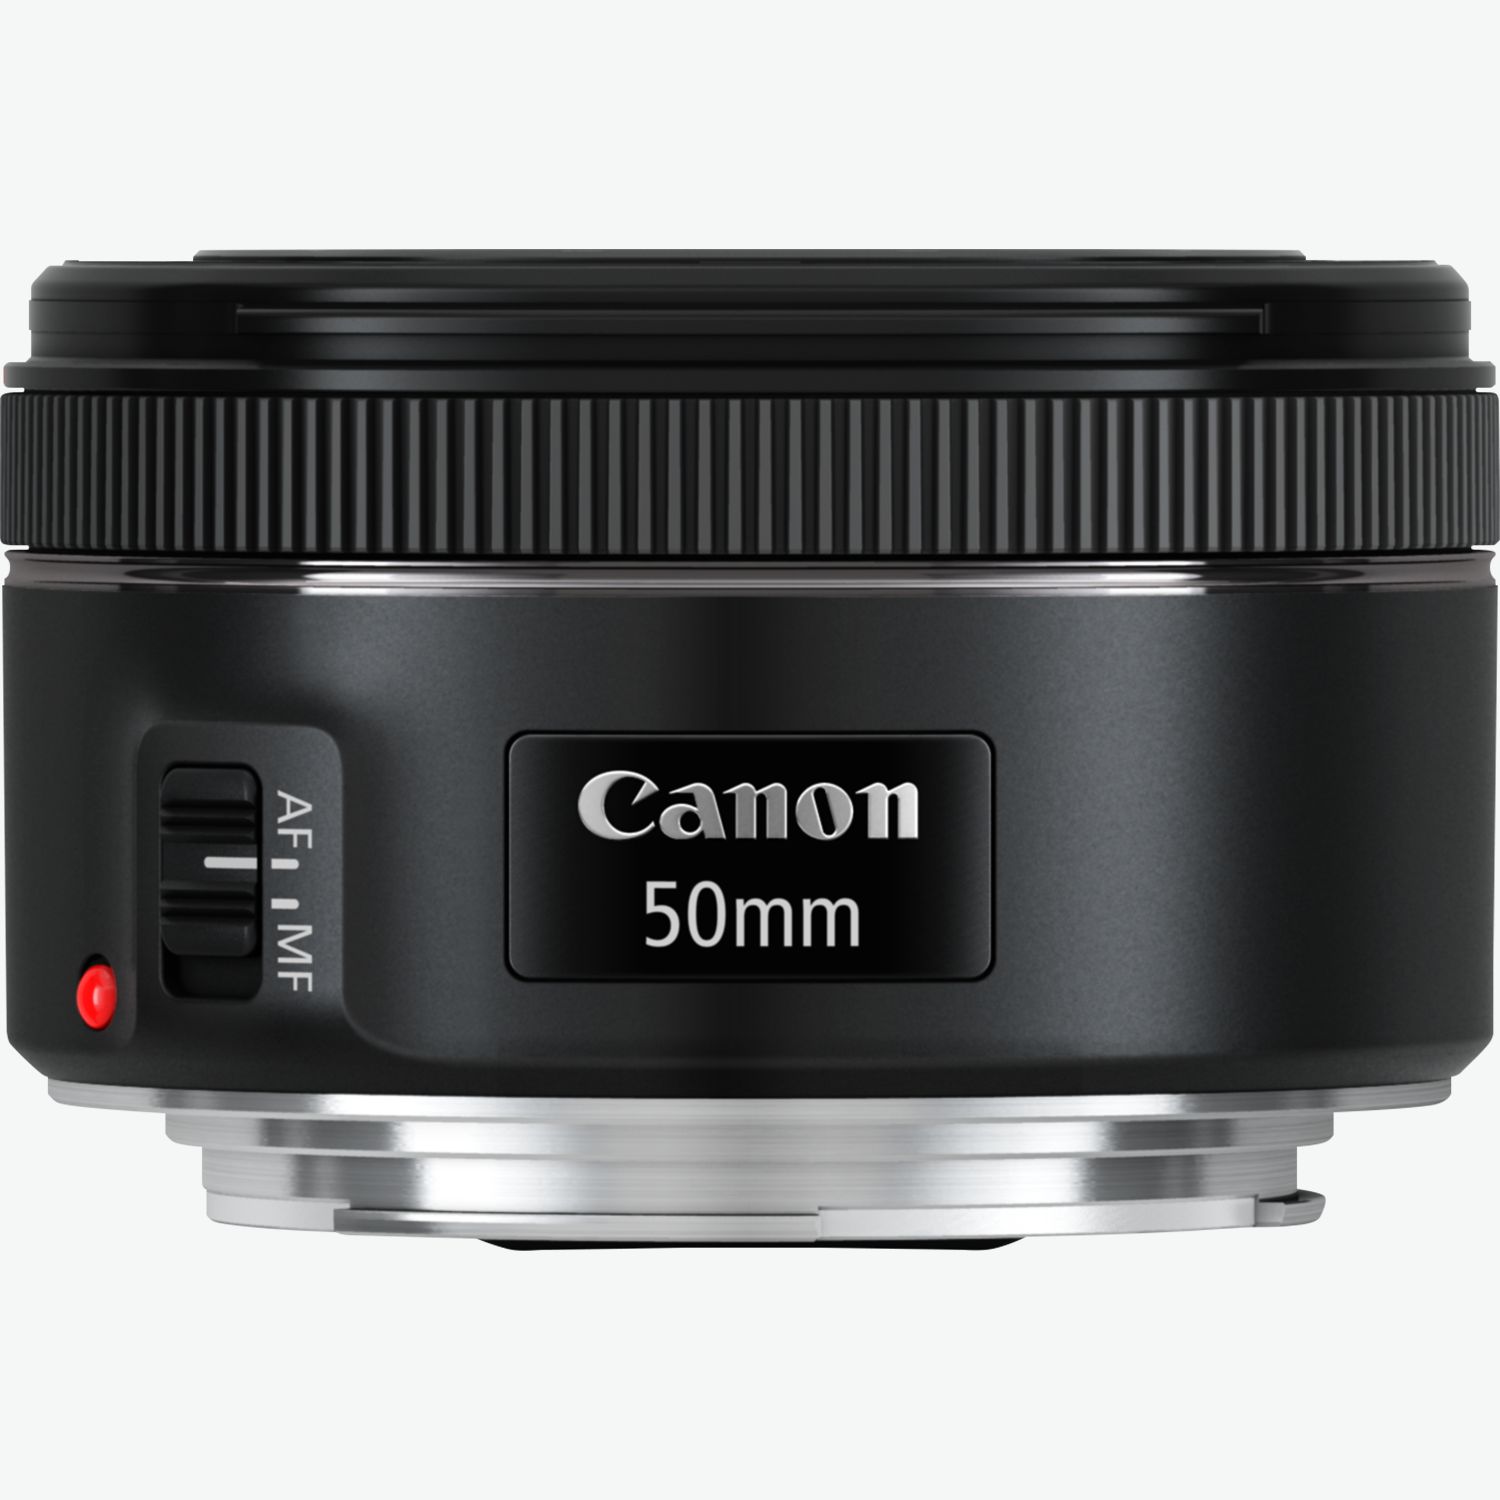 Canon m50 объективы. Canon EF 50 F/1.8 STM. Объектив Canon EF 50 F1.8 STM. Canon EF 50mm f/1.8 STM. Canon EF 50mm f/1.8.